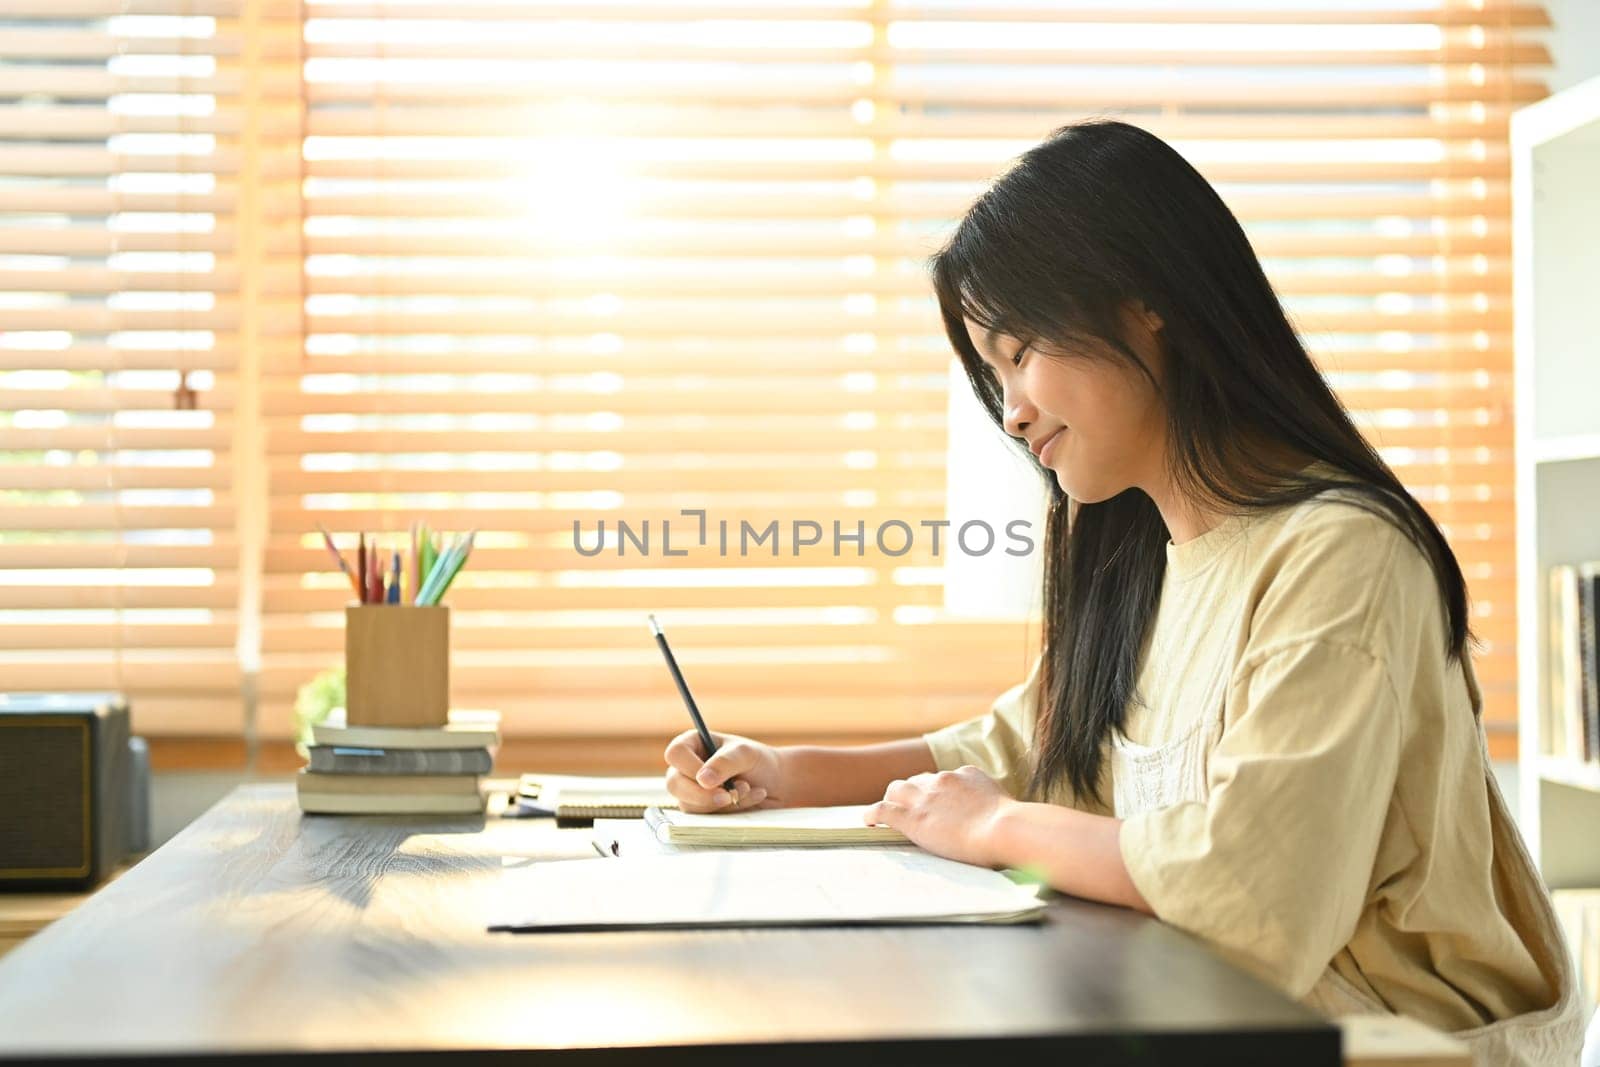 Smiling asian teen girl making notes, ding essay homework assignment at home. Learning and education concept.